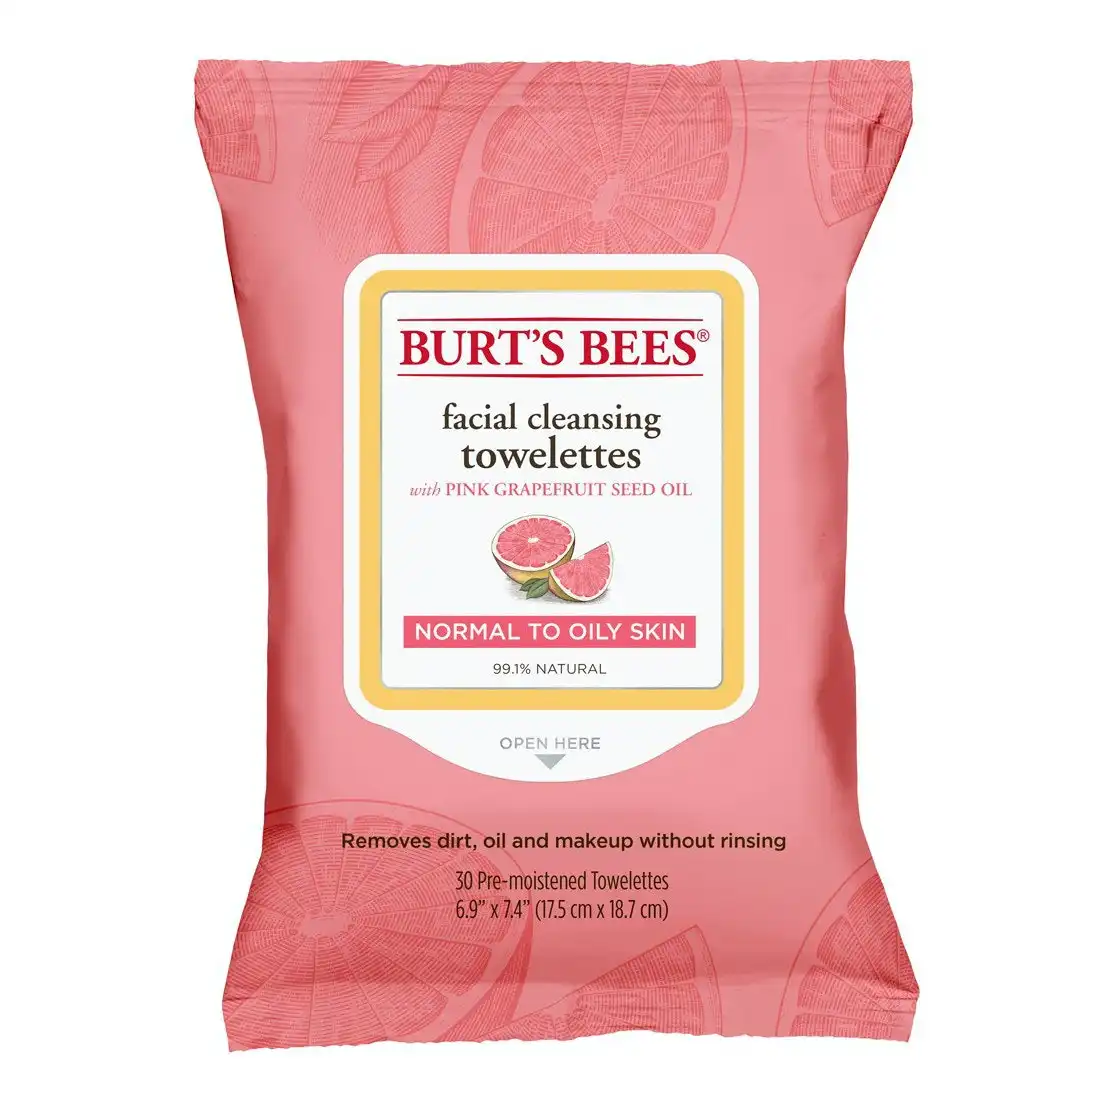 Burt's Bees Facial Cleansing Towelettes With Pink Grapefruit Seed Oil 30